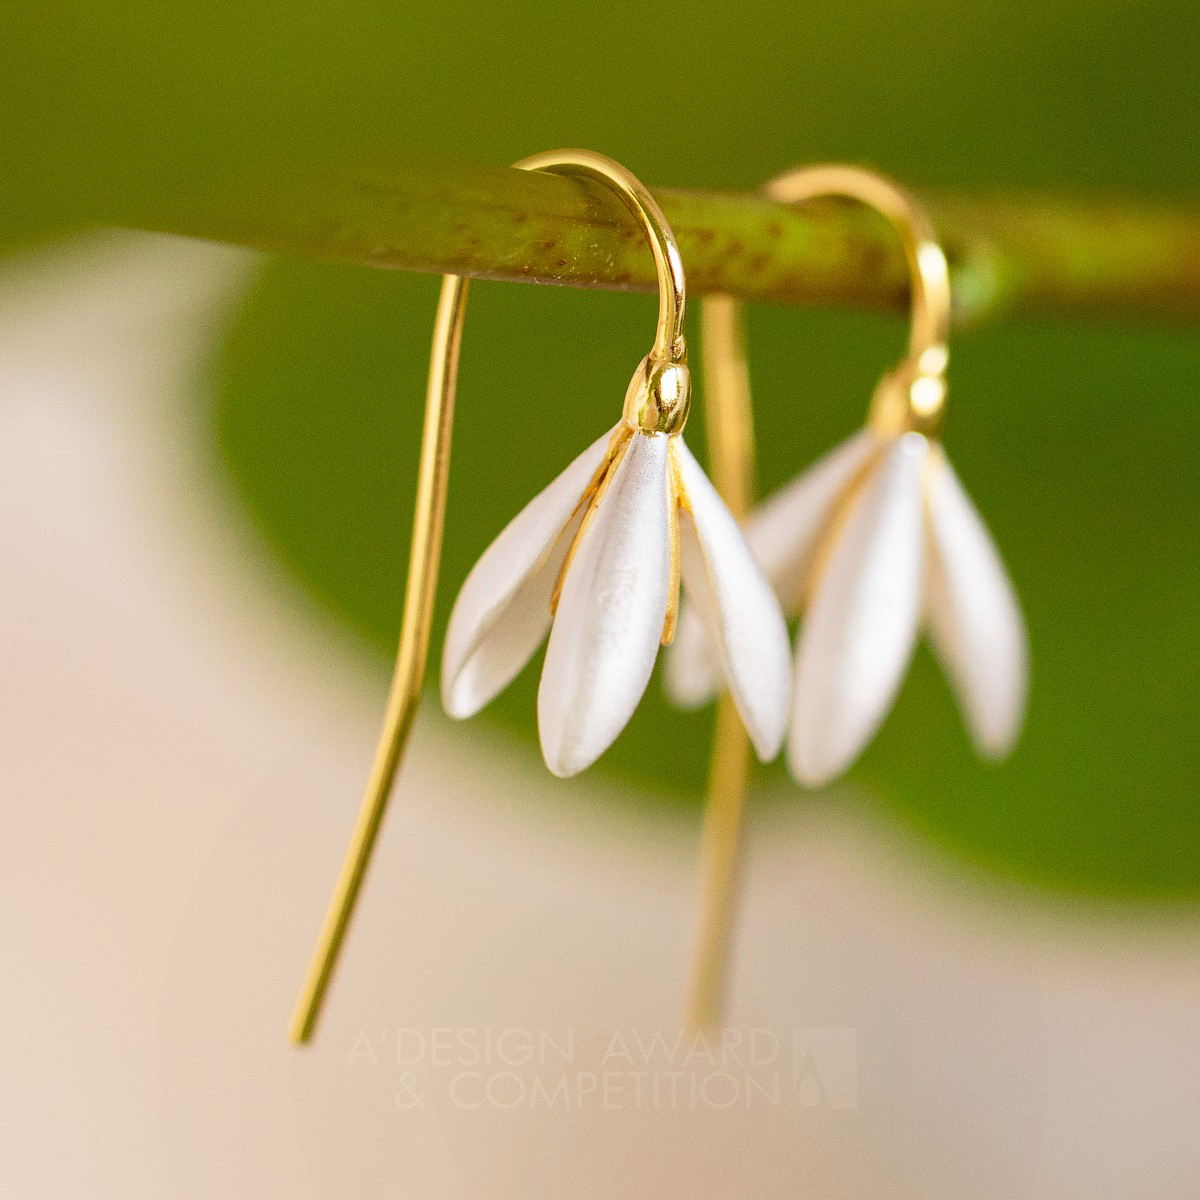 Adelina Brask wins Iron at the prestigious A' Jewelry Design Award with Snowdrops Earrings.